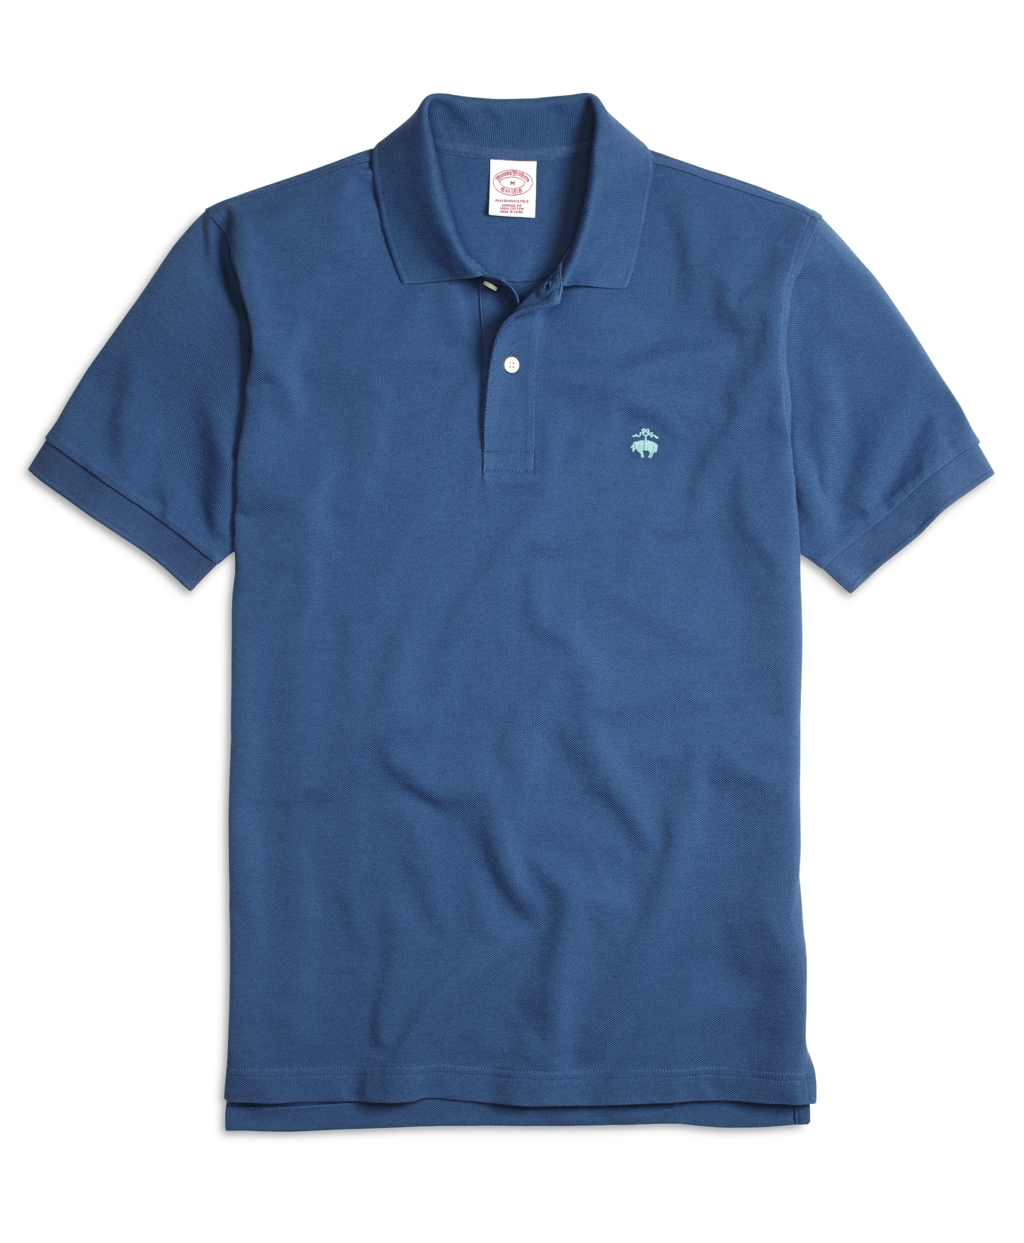 Brooks brothers Golden Fleece® Original Fit Performance Polo Shirt in ...